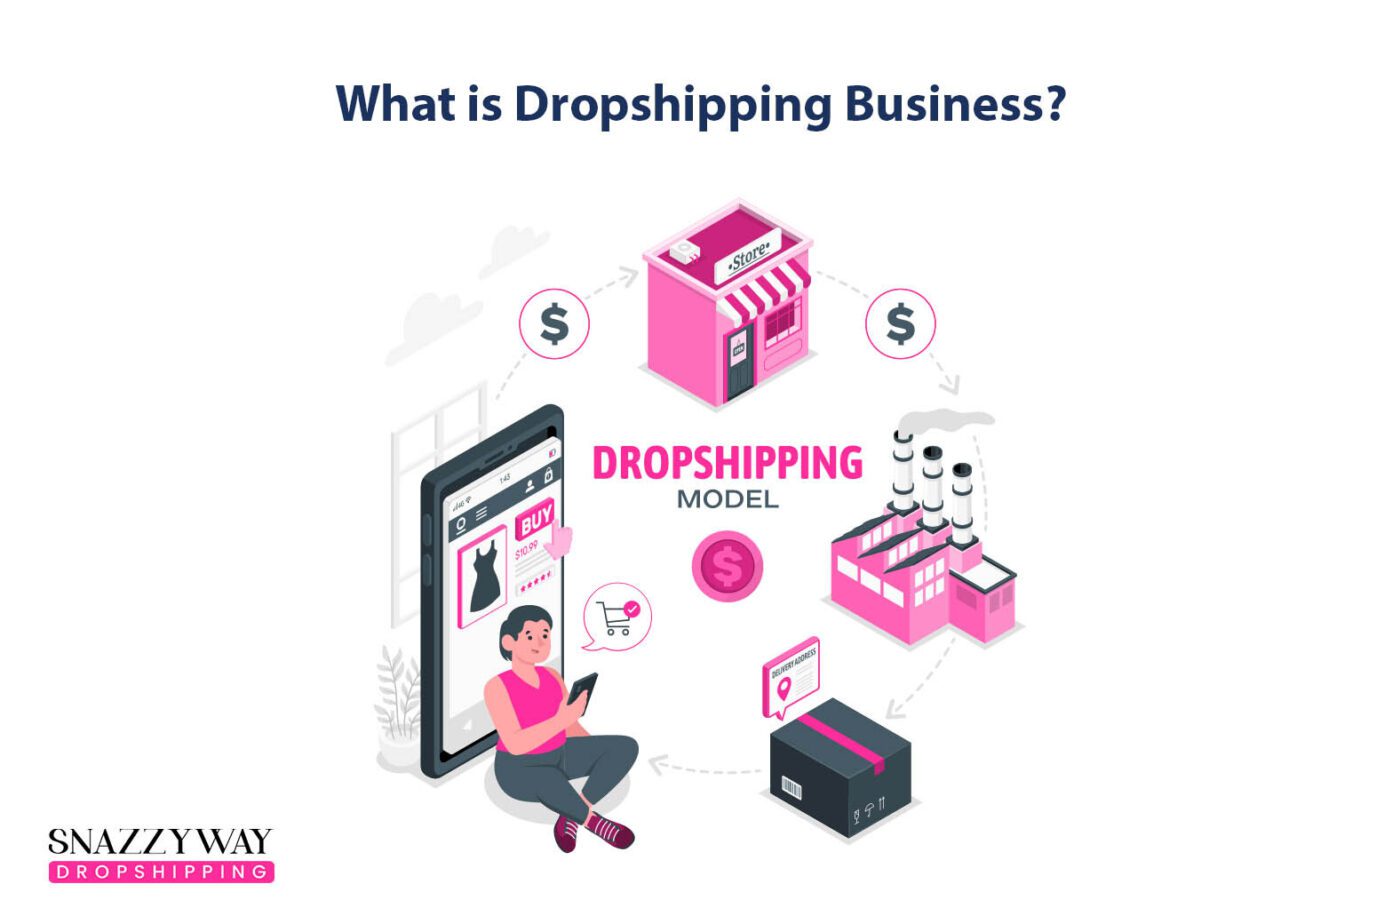 What is Dropshipping Business?